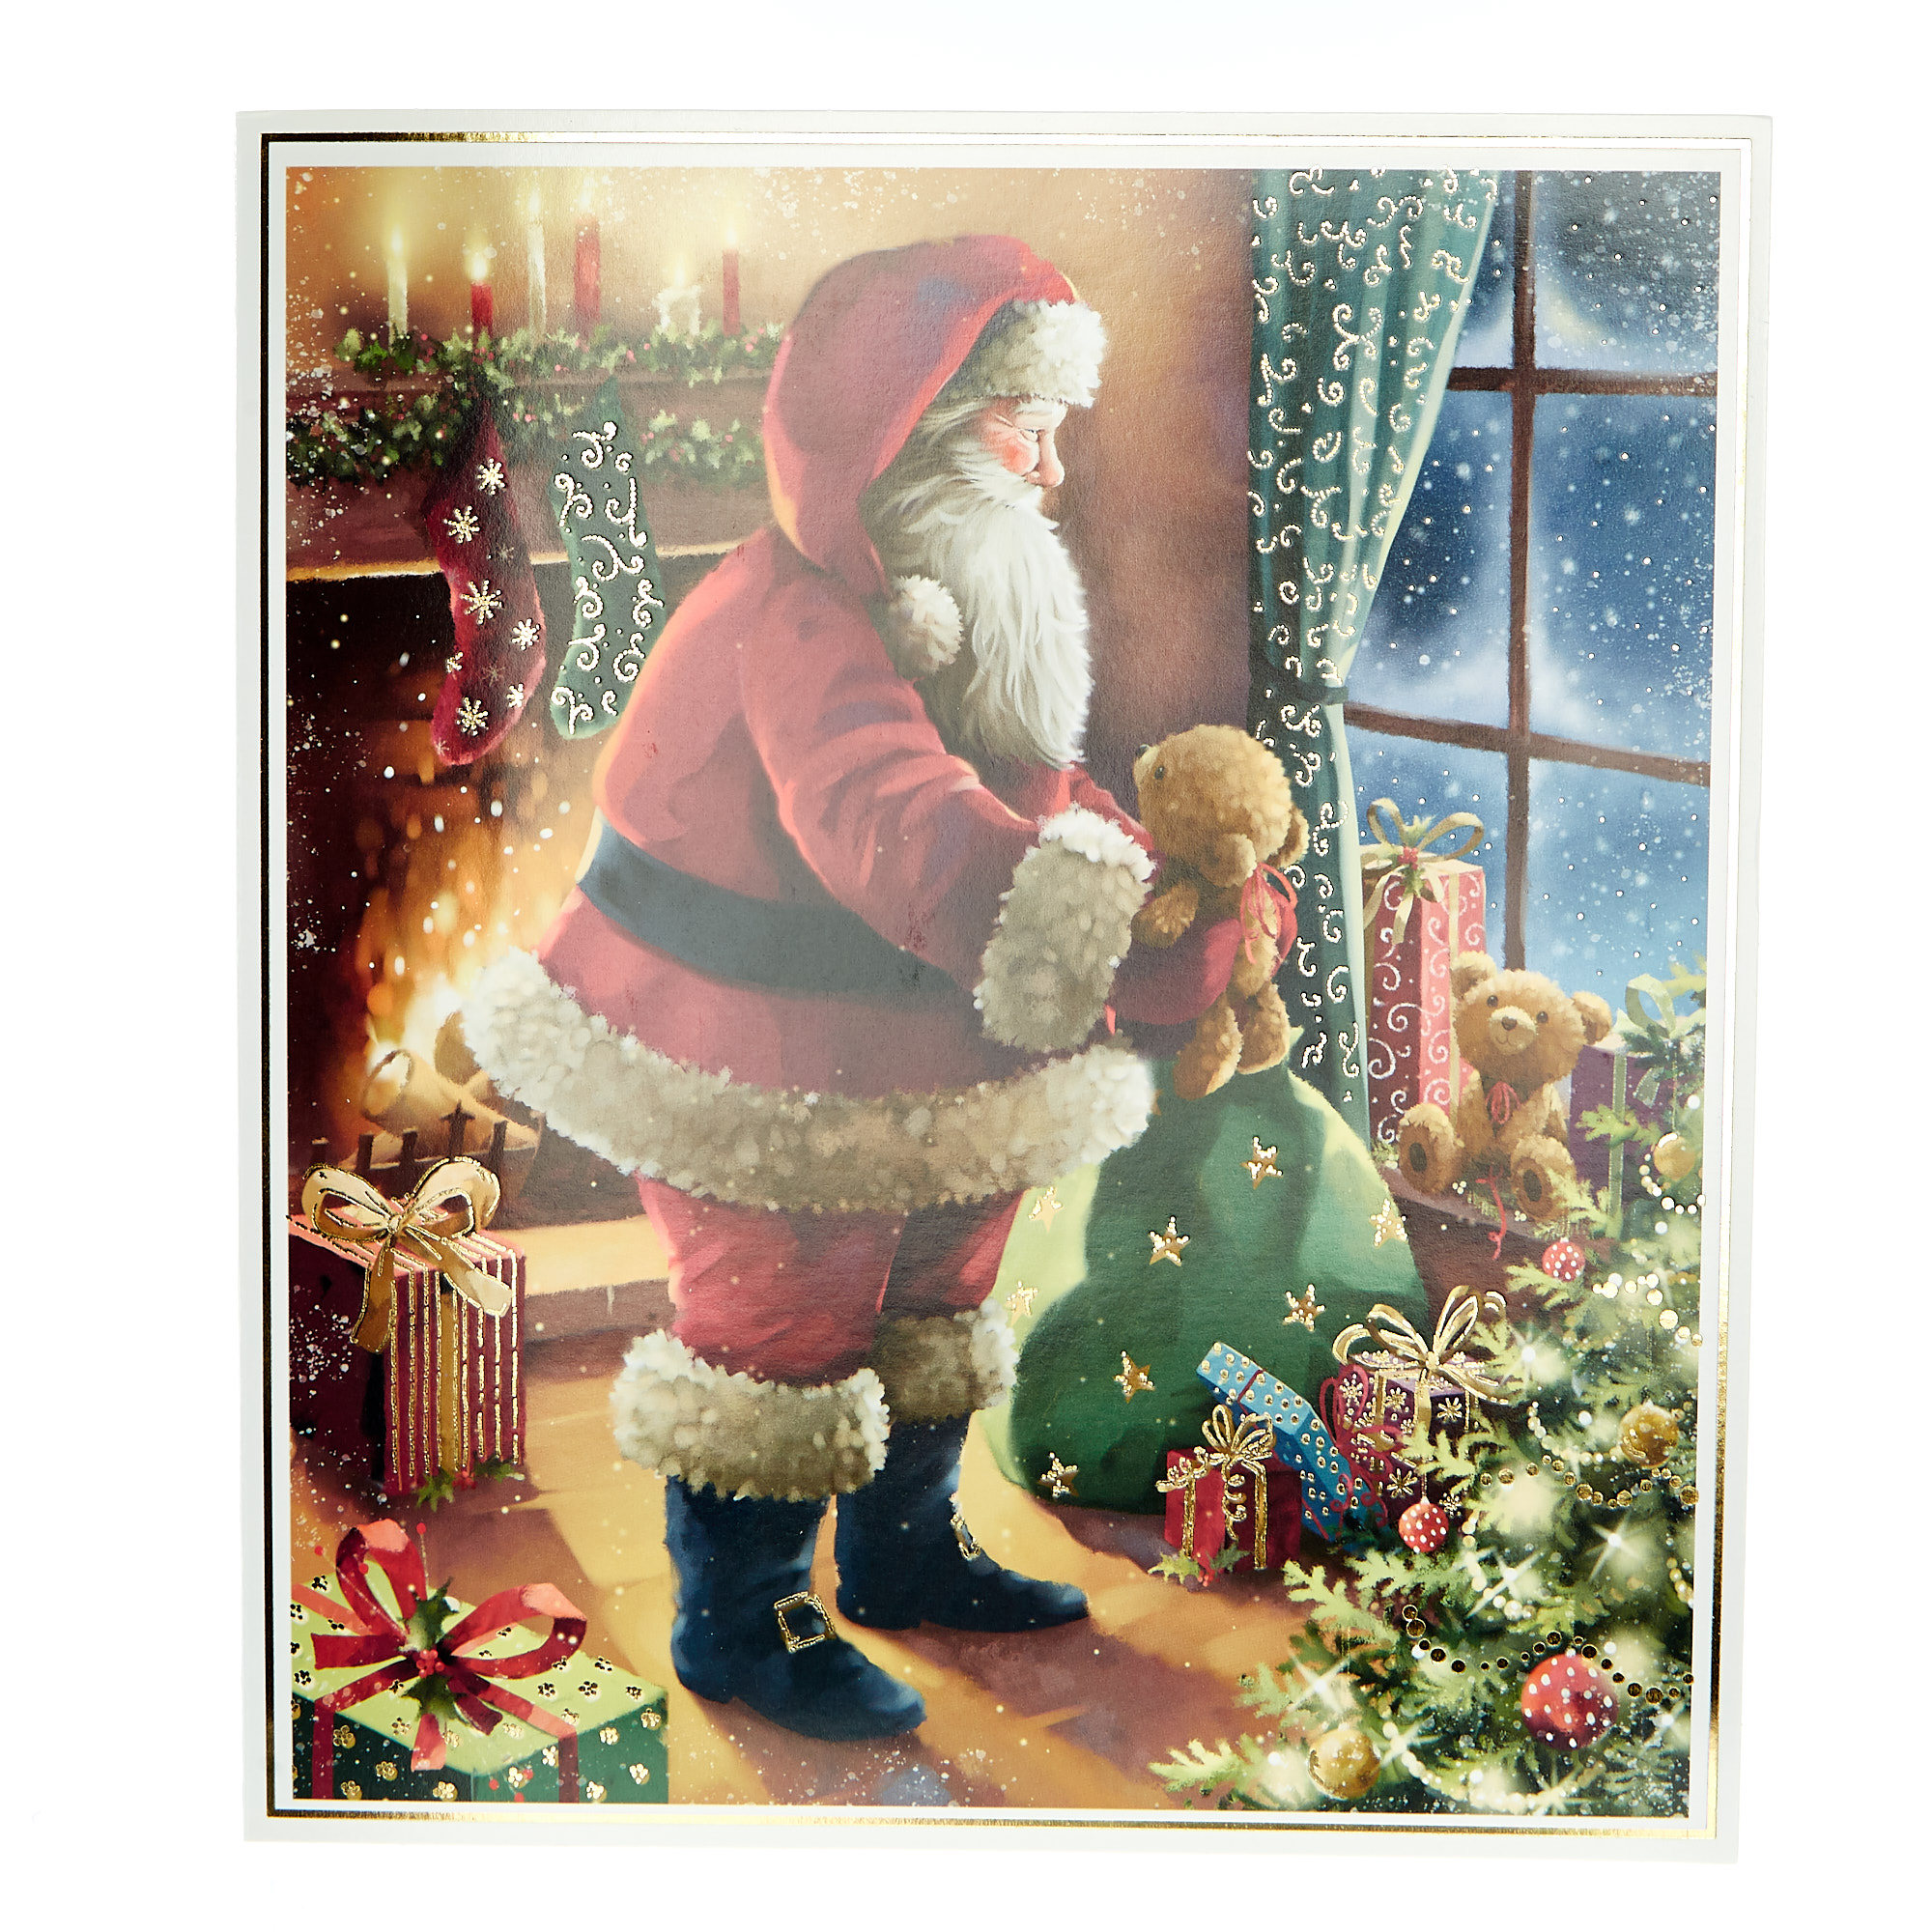 Box of 12 Deluxe Traditional Charity Christmas Cards - 2 Designs